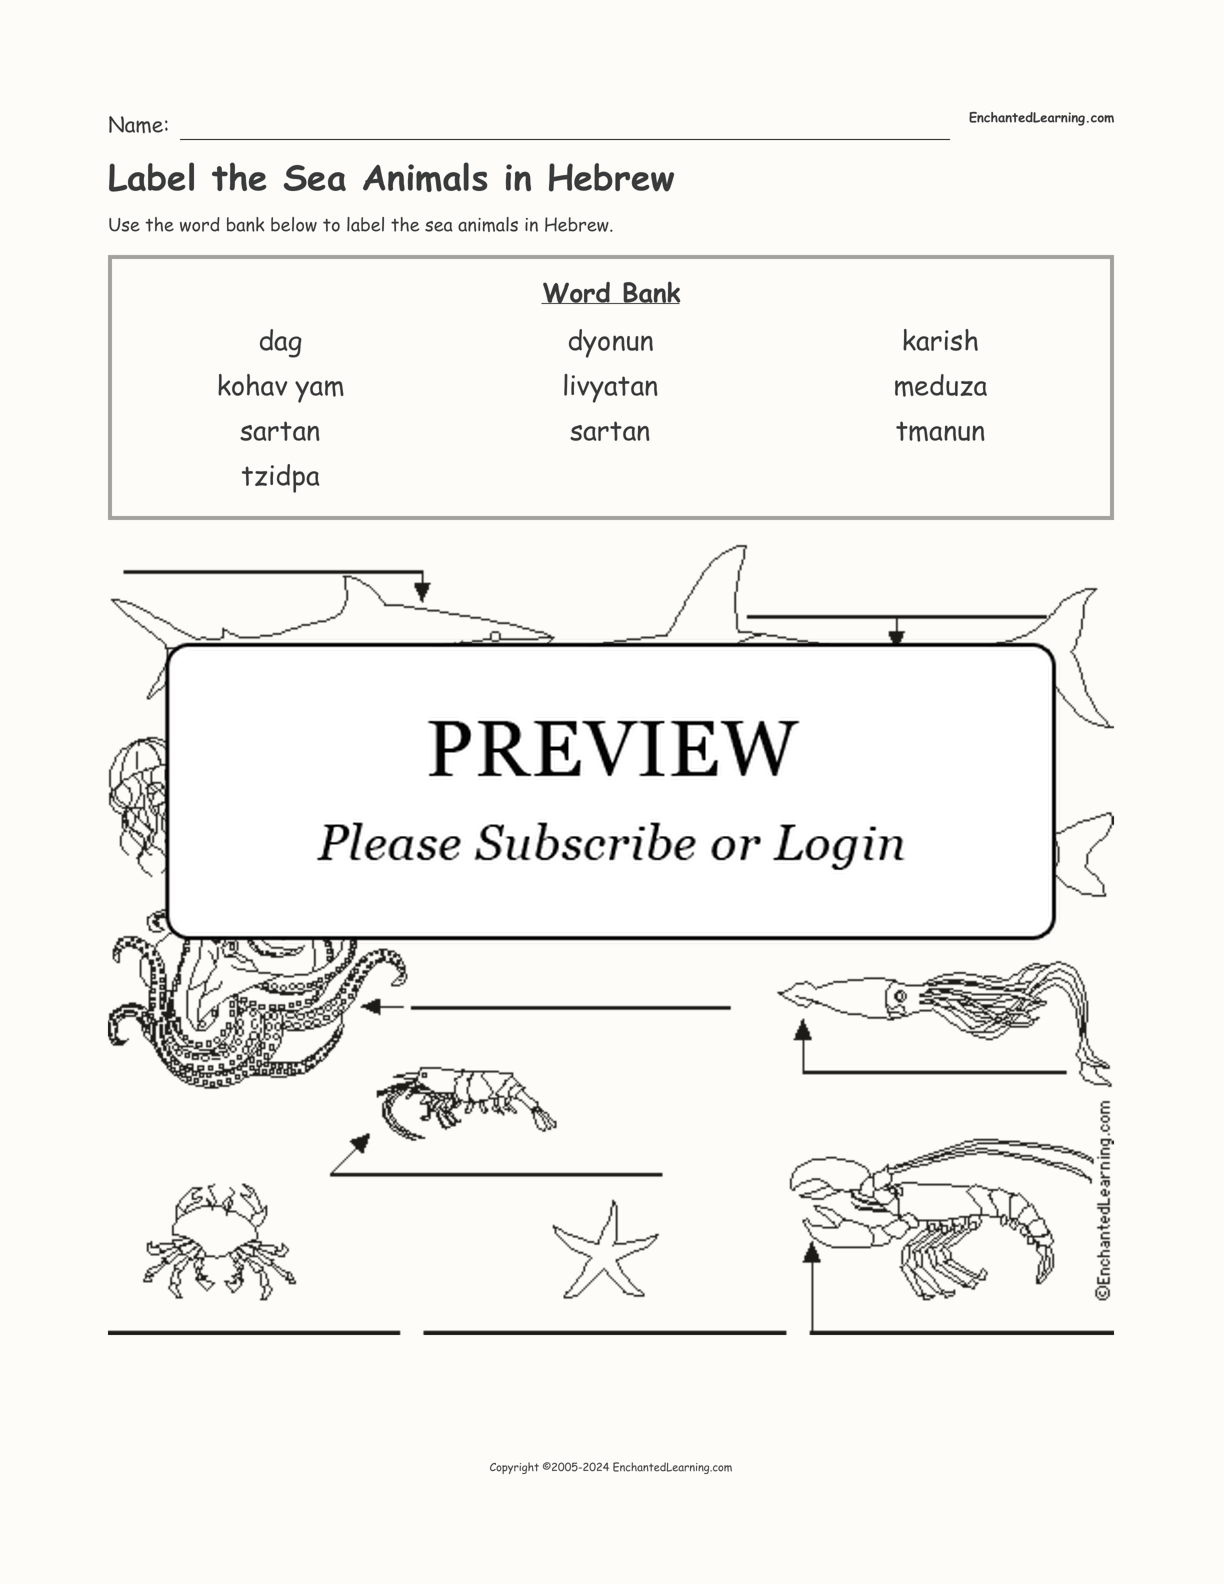 Label the Sea Animals in Hebrew interactive worksheet page 1